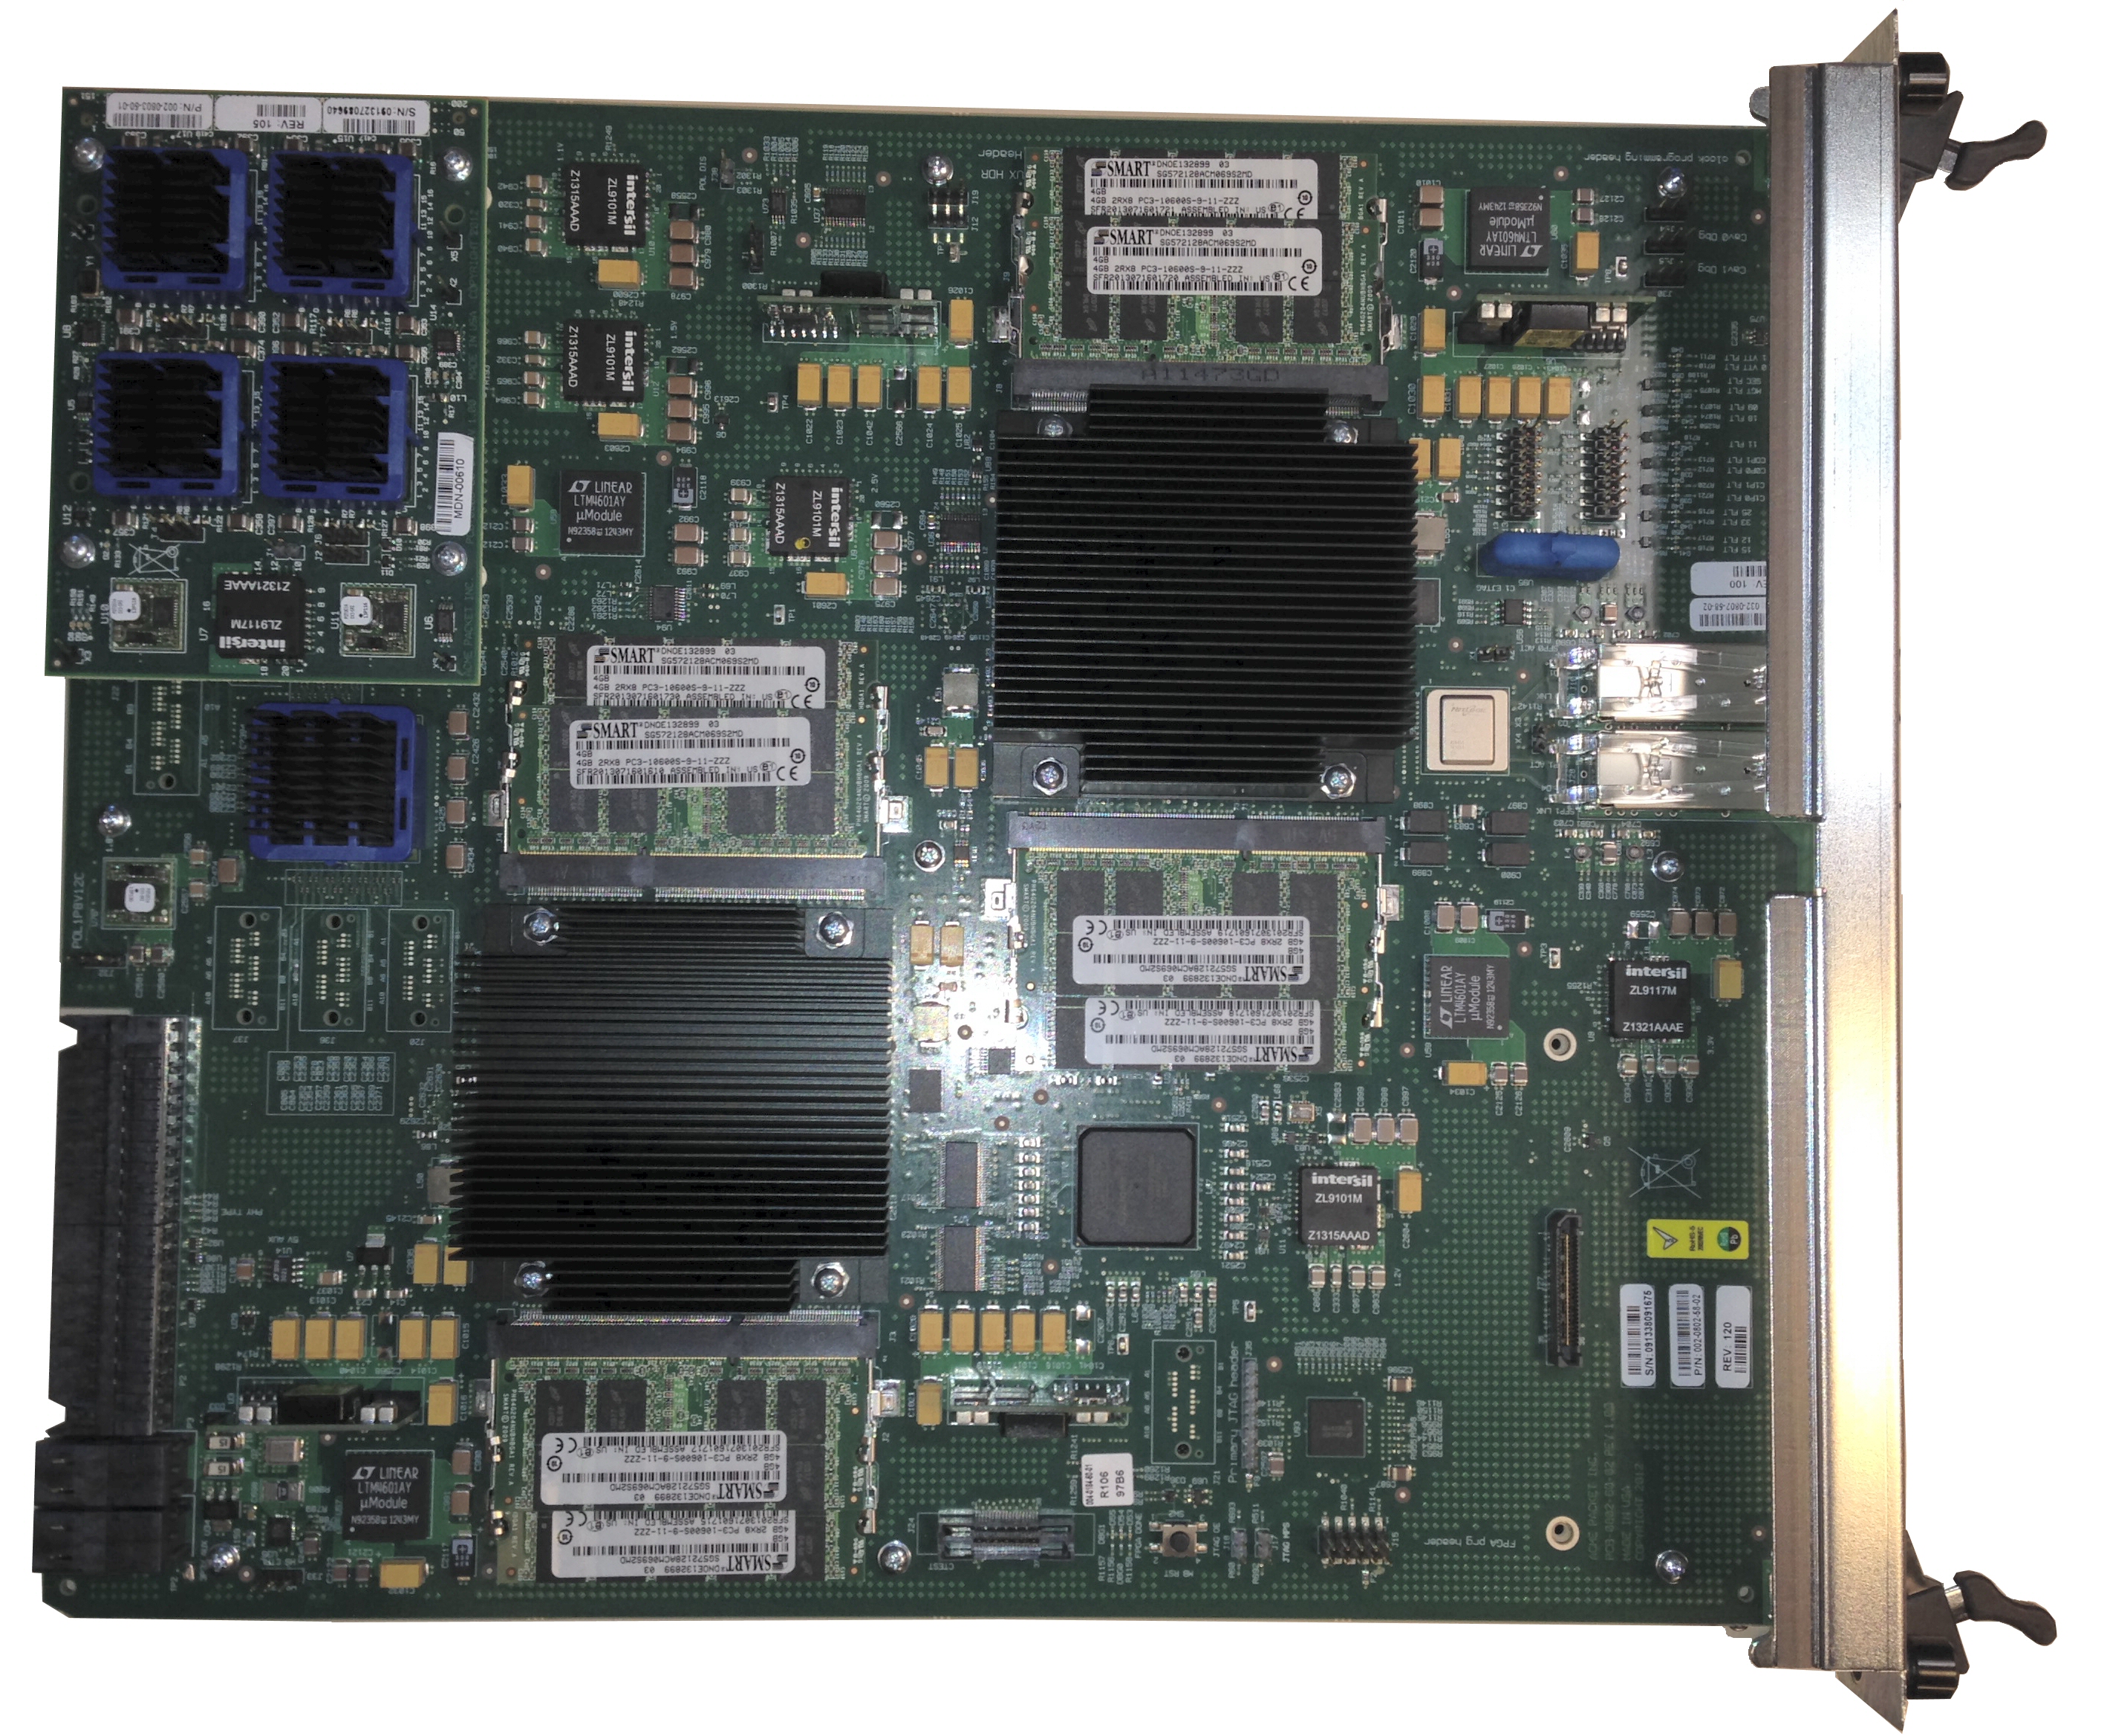 This picture shows the SSM3 module installed on the NIU PCB.